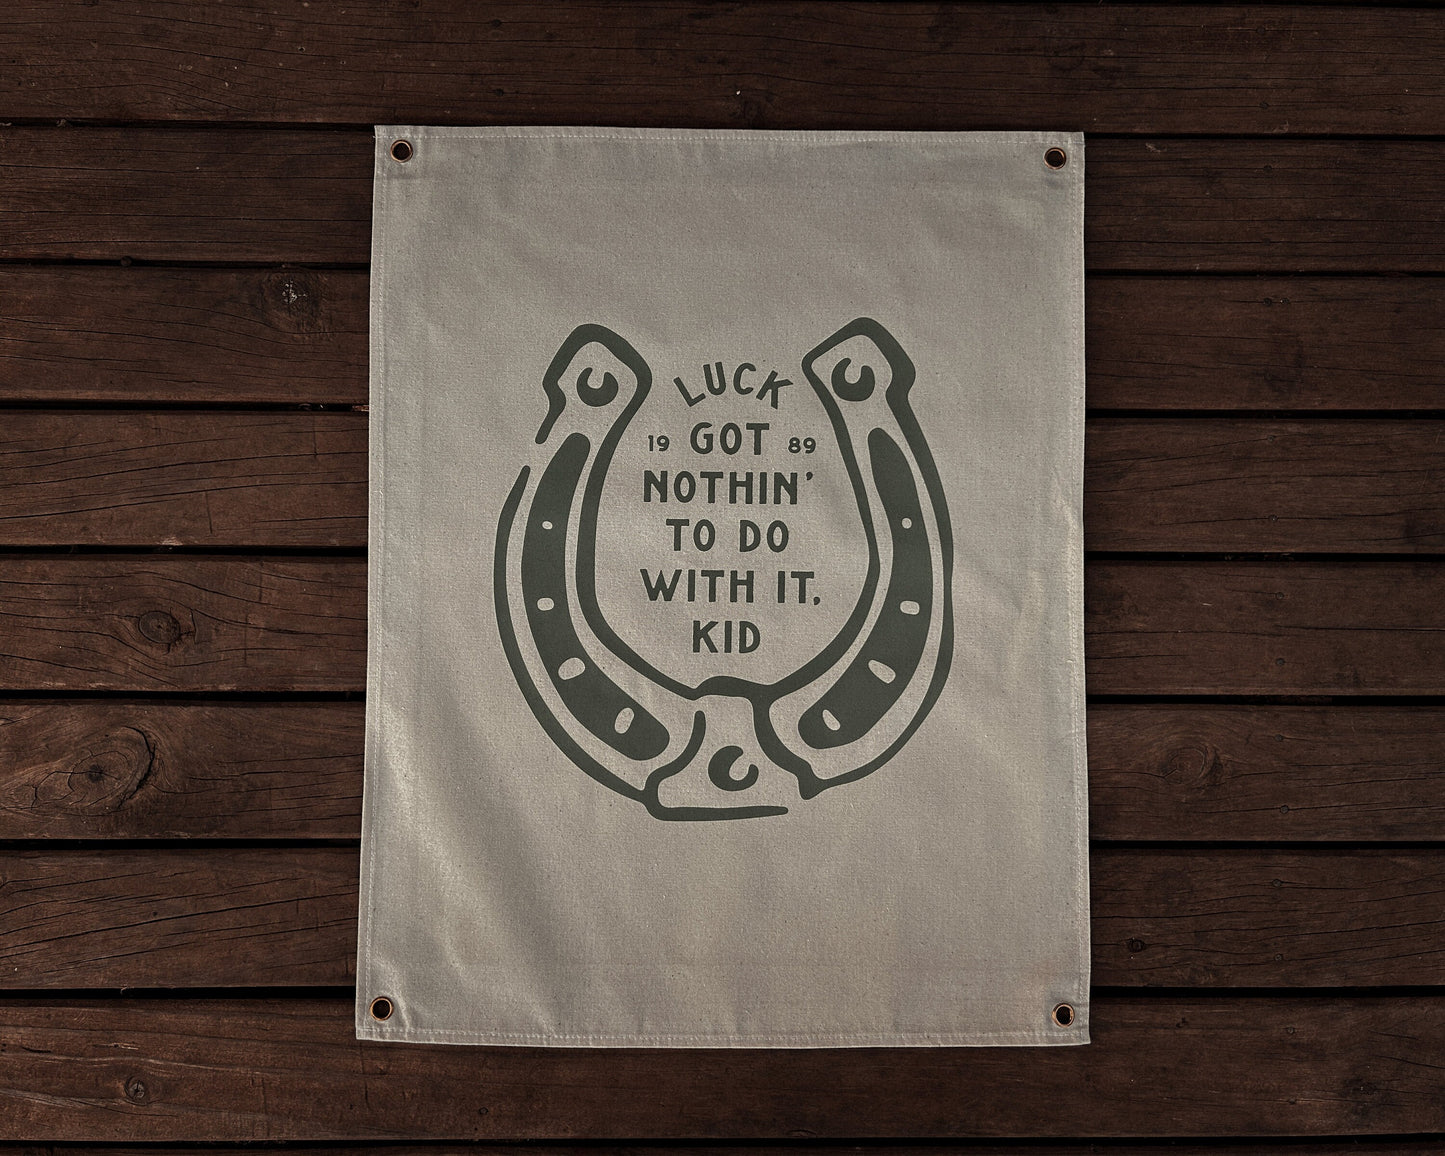 Luck got nothin' to do with it, kid Canvas Banner